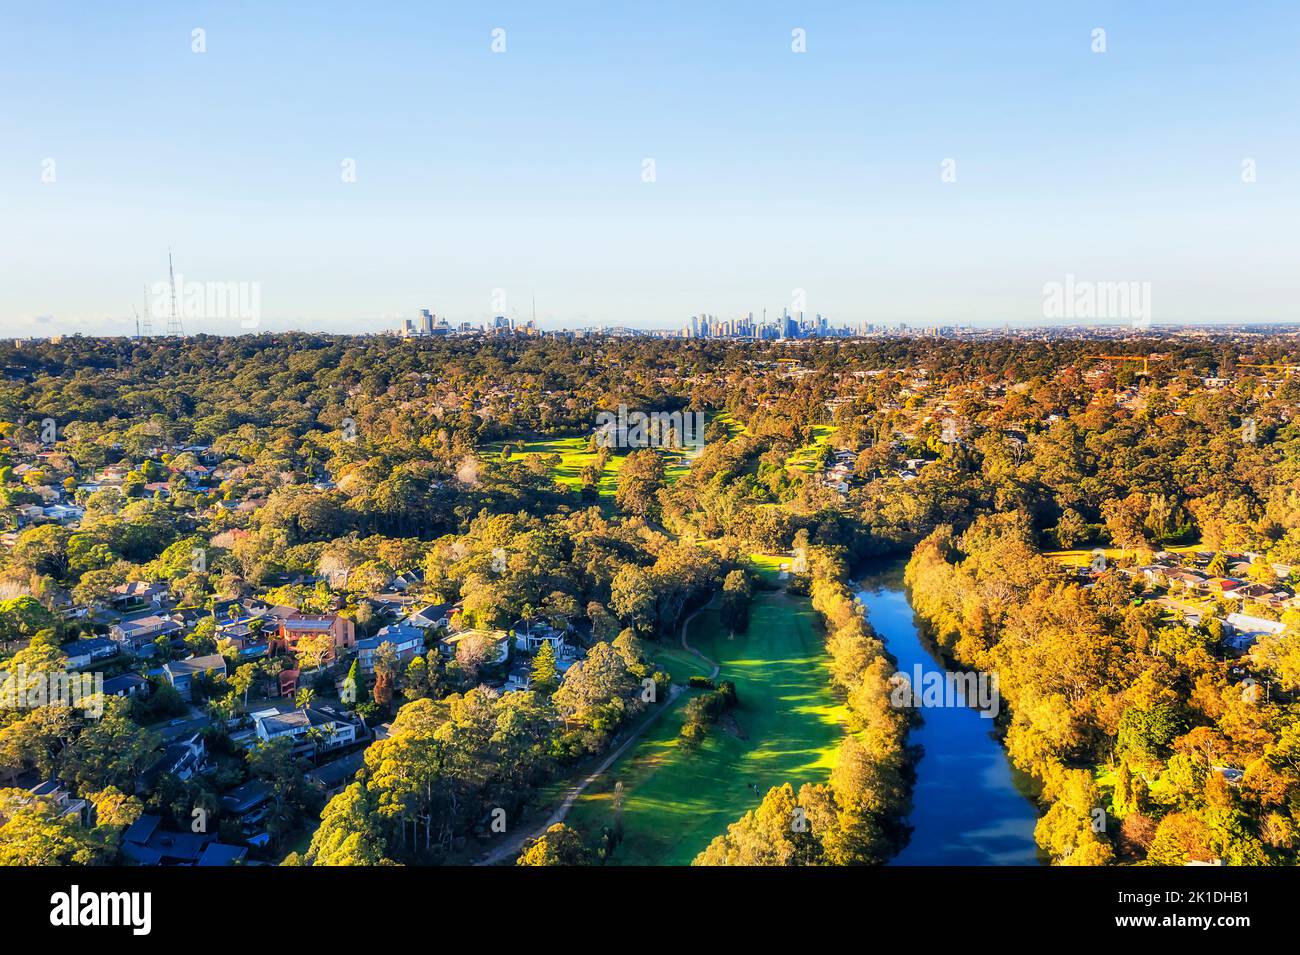 Lane Cover river and national park in Sydney - aerial cityscape towards distant city CBD Skyline. Stock Photo